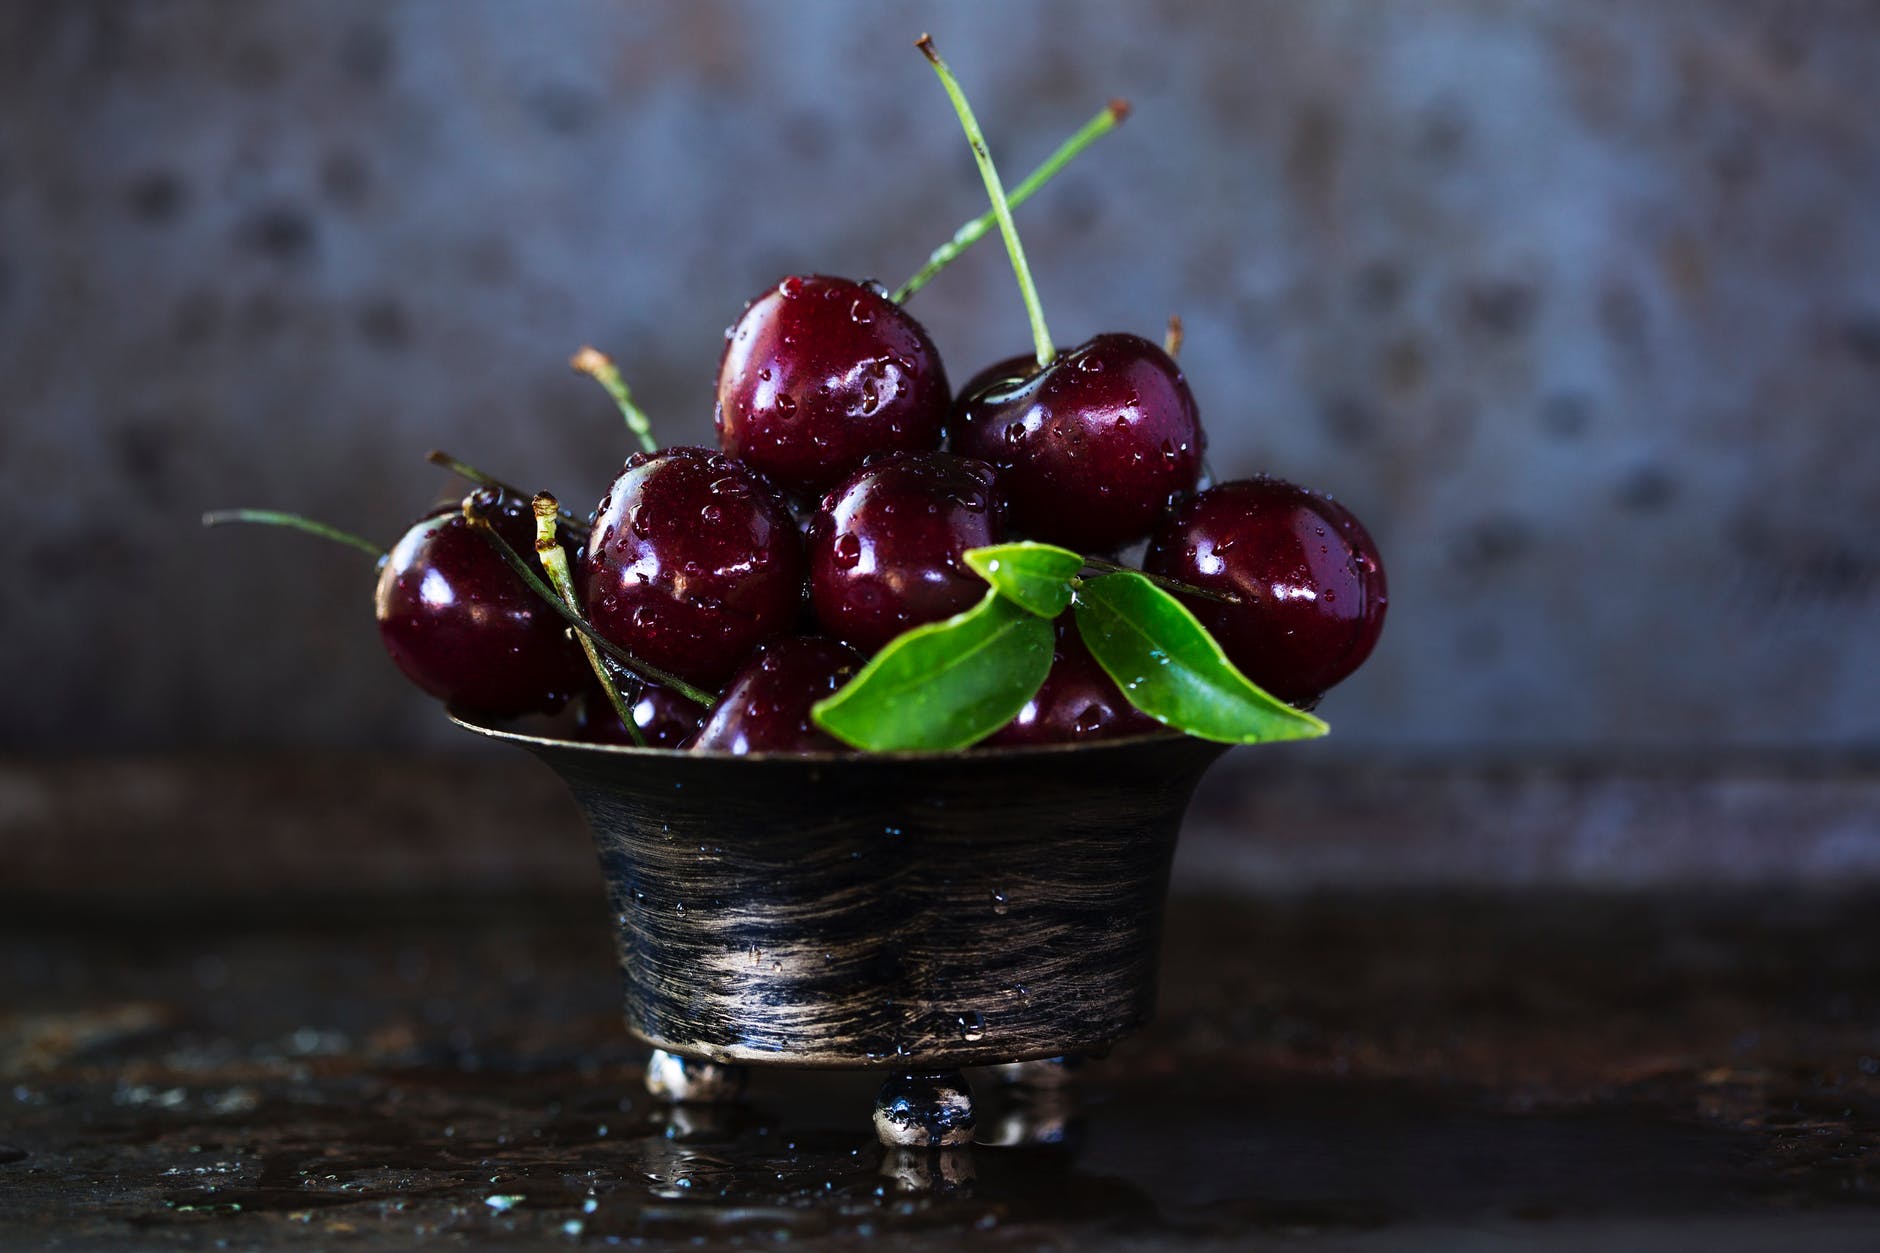 Are sweet cherries toxic to cats?